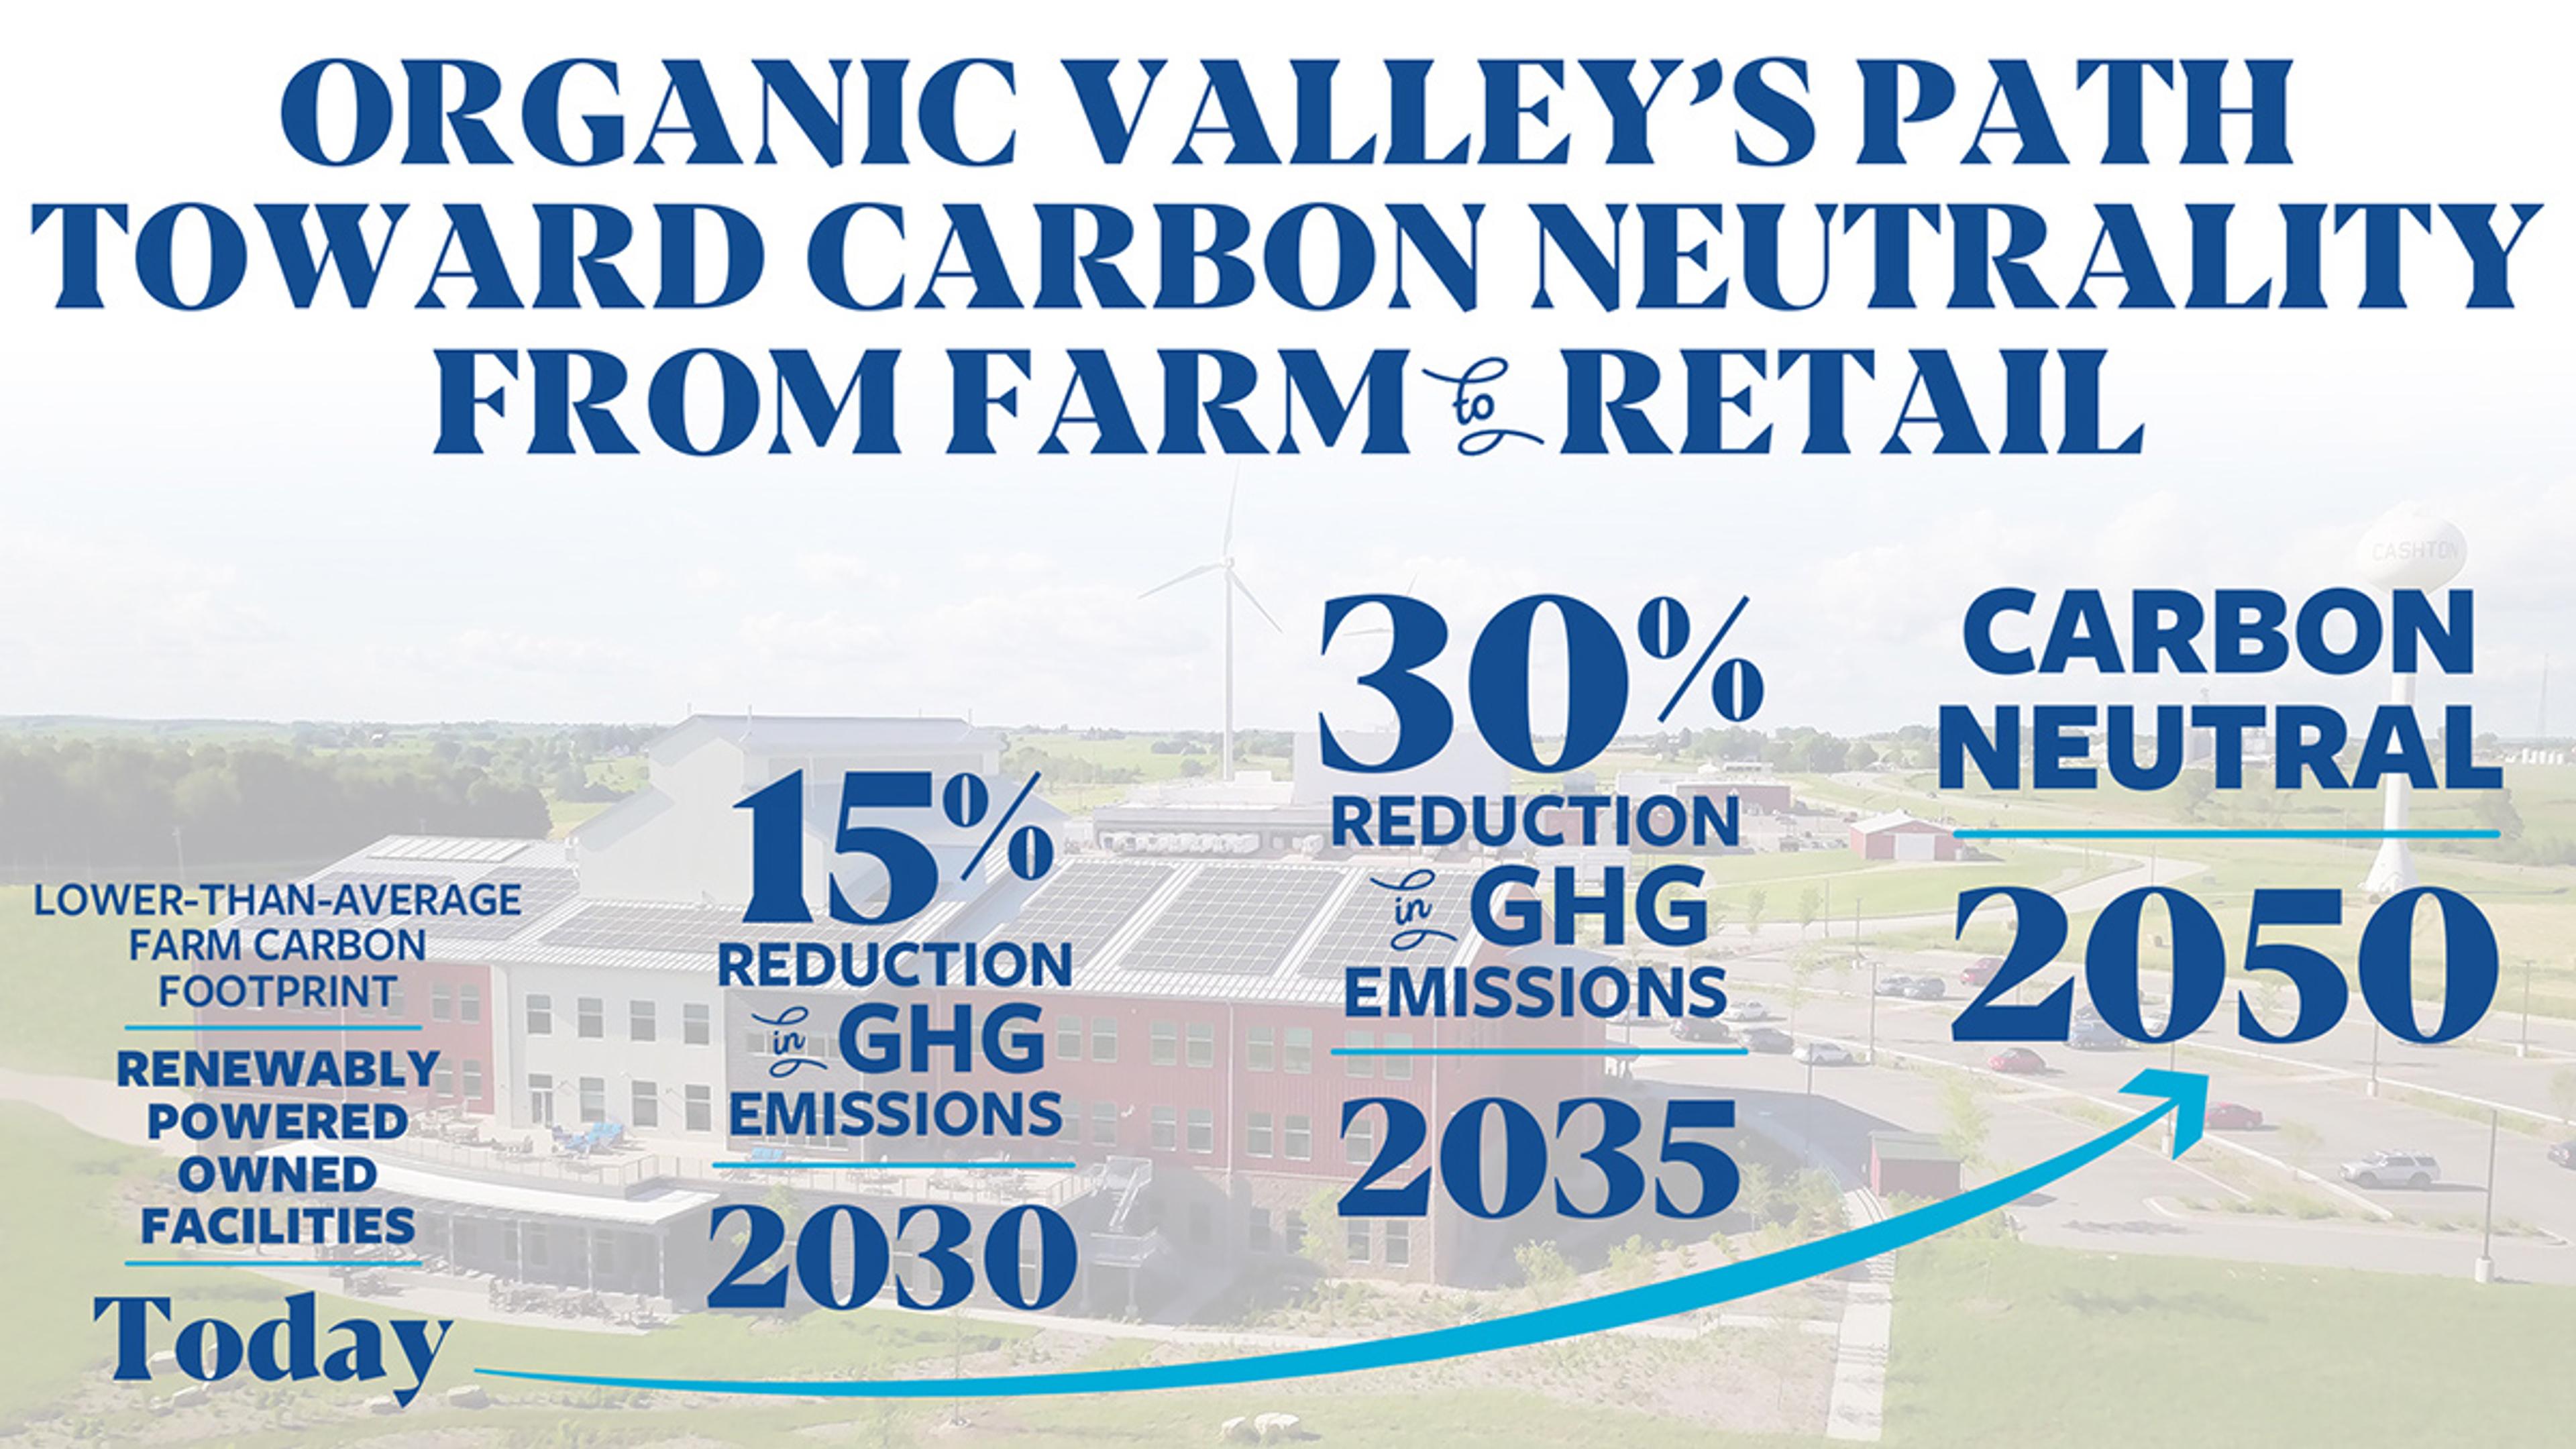 Organic Valley's commitment to be carbon neutral by 2050 infographic.